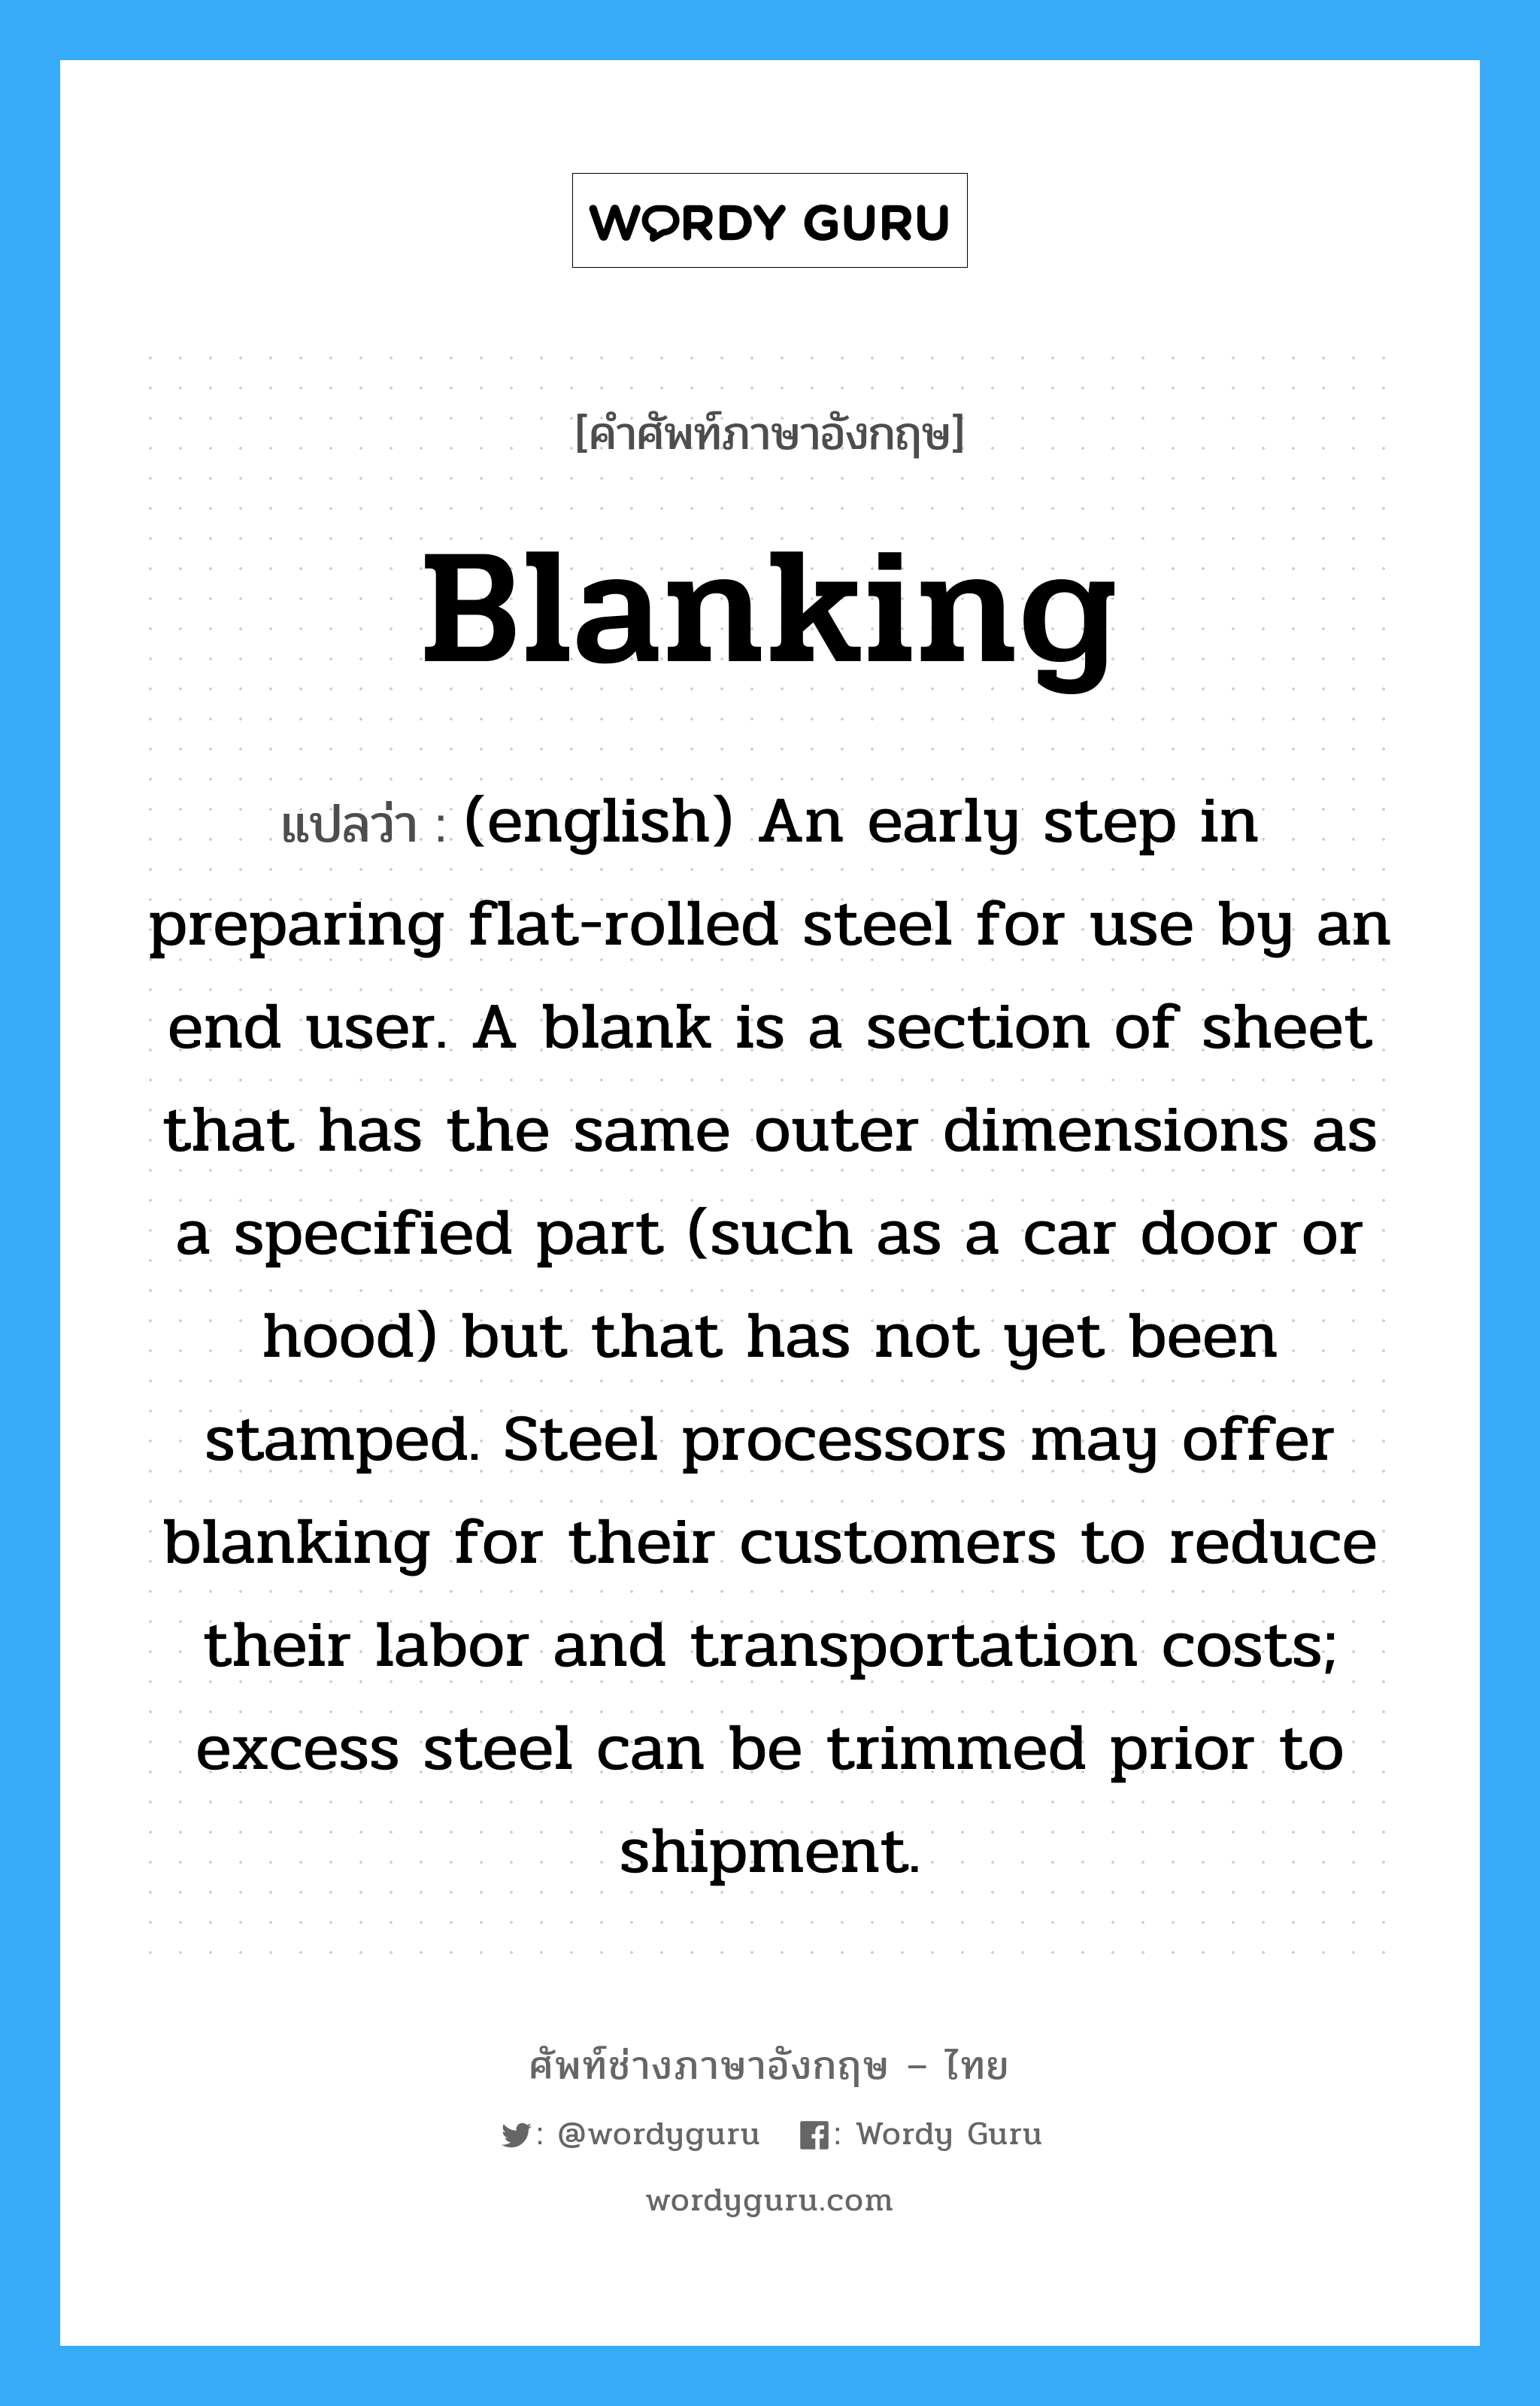 Blanking แปลว่า?, คำศัพท์ช่างภาษาอังกฤษ - ไทย Blanking คำศัพท์ภาษาอังกฤษ Blanking แปลว่า (english) An early step in preparing flat-rolled steel for use by an end user. A blank is a section of sheet that has the same outer dimensions as a specified part (such as a car door or hood) but that has not yet been stamped. Steel processors may offer blanking for their customers to reduce their labor and transportation costs; excess steel can be trimmed prior to shipment.